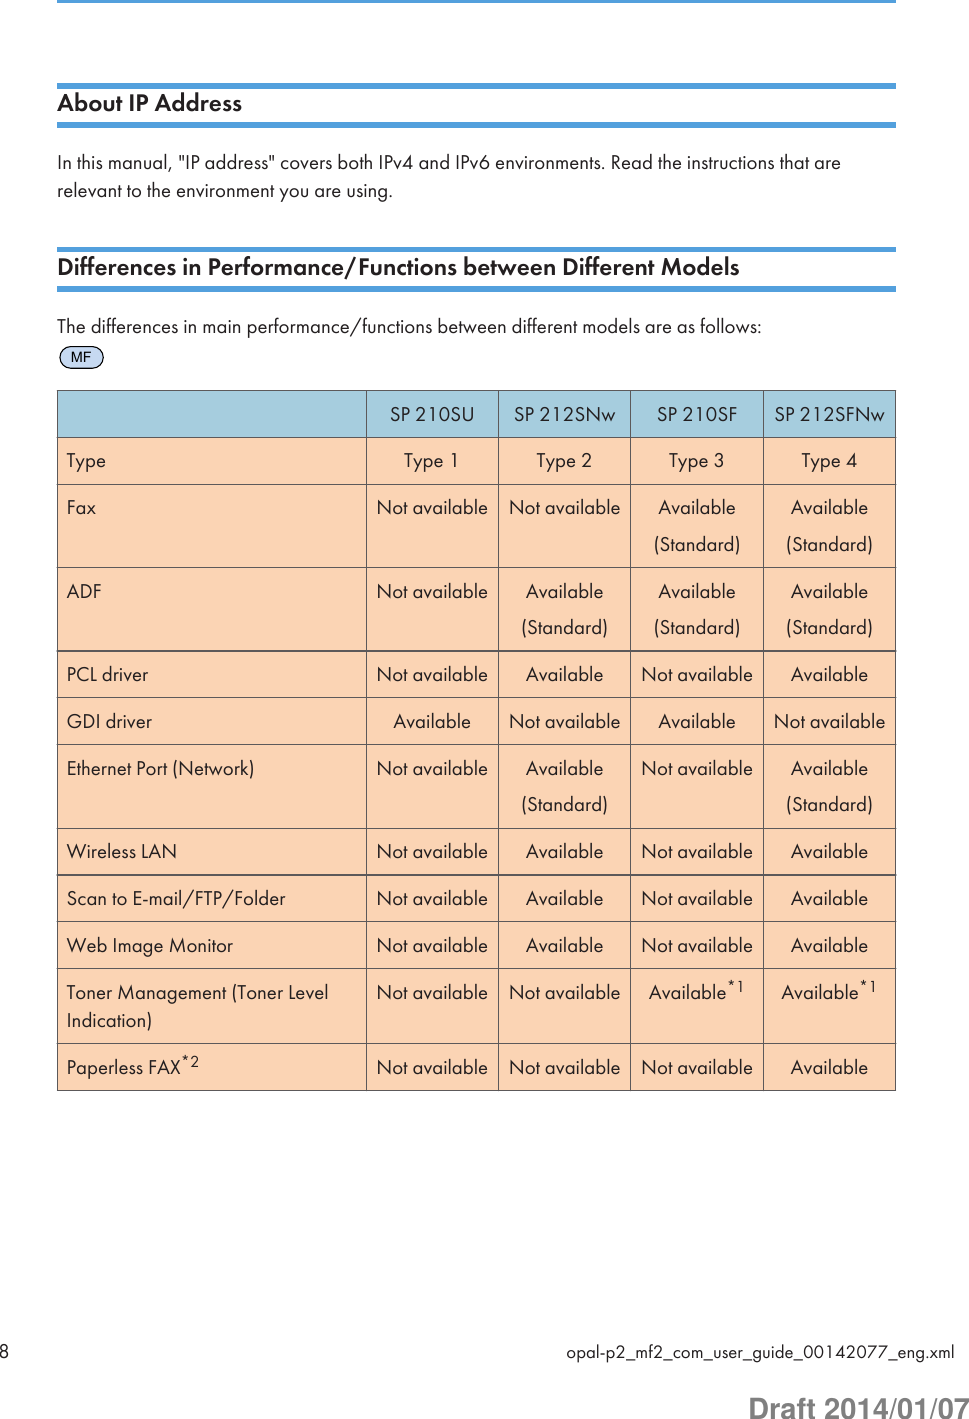 About IP AddressIn this manual, &quot;IP address&quot; covers both IPv4 and IPv6 environments. Read the instructions that arerelevant to the environment you are using.Differences in Performance/Functions between Different ModelsThe differences in main performance/functions between different models are as follows:MFSP 210SU SP 212SNw SP 210SF SP 212SFNwType Type 1 Type 2 Type 3 Type 4Fax Not available Not available Available(Standard)Available(Standard)ADF Not available Available(Standard)Available(Standard)Available(Standard)PCL driver Not available Available Not available AvailableGDI driver Available Not available Available Not availableEthernet Port (Network) Not available Available(Standard)Not available Available(Standard)Wireless LAN Not available Available Not available AvailableScan to E-mail/FTP/Folder Not available Available Not available AvailableWeb Image Monitor Not available Available Not available AvailableToner Management (Toner LevelIndication)Not available Not available Available*1 Available*1Paperless FAX*2 Not available Not available Not available Available8opal-p2_mf2_com_user_guide_00142077_eng.xmlDraft 2014/01/07